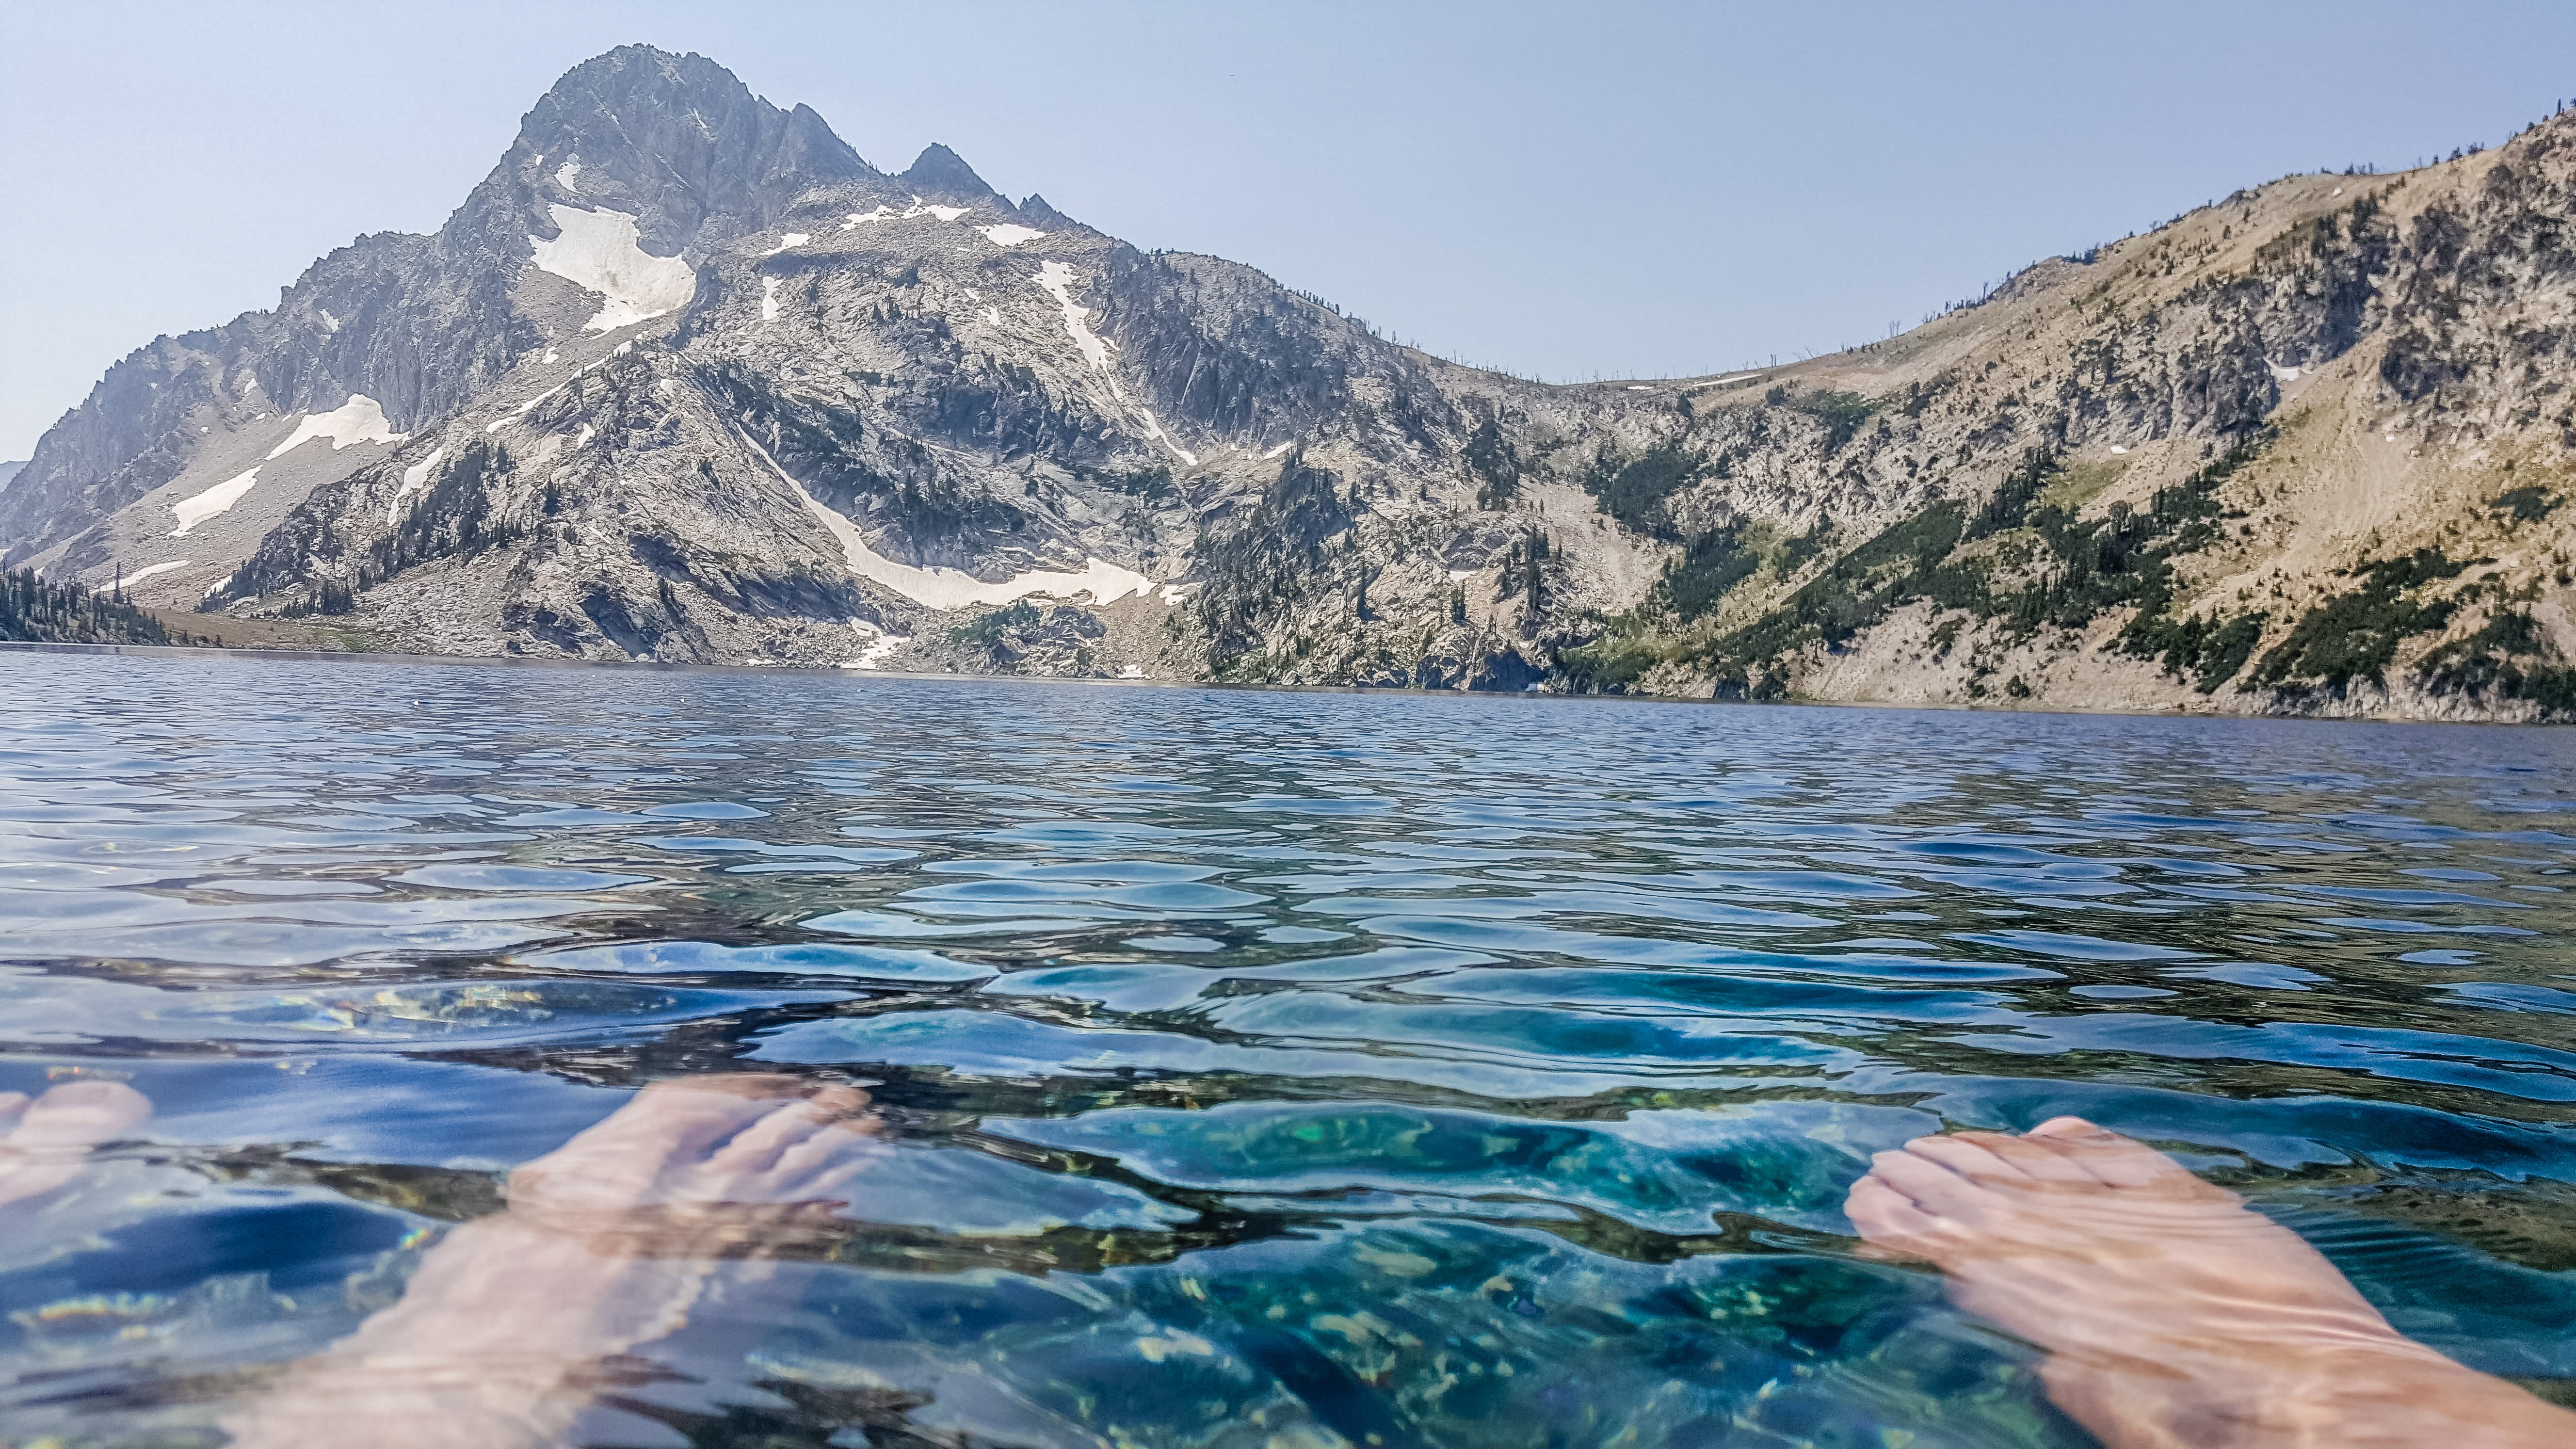 Dipped our feet into the very cold, yet refreshing snow melt lake water.